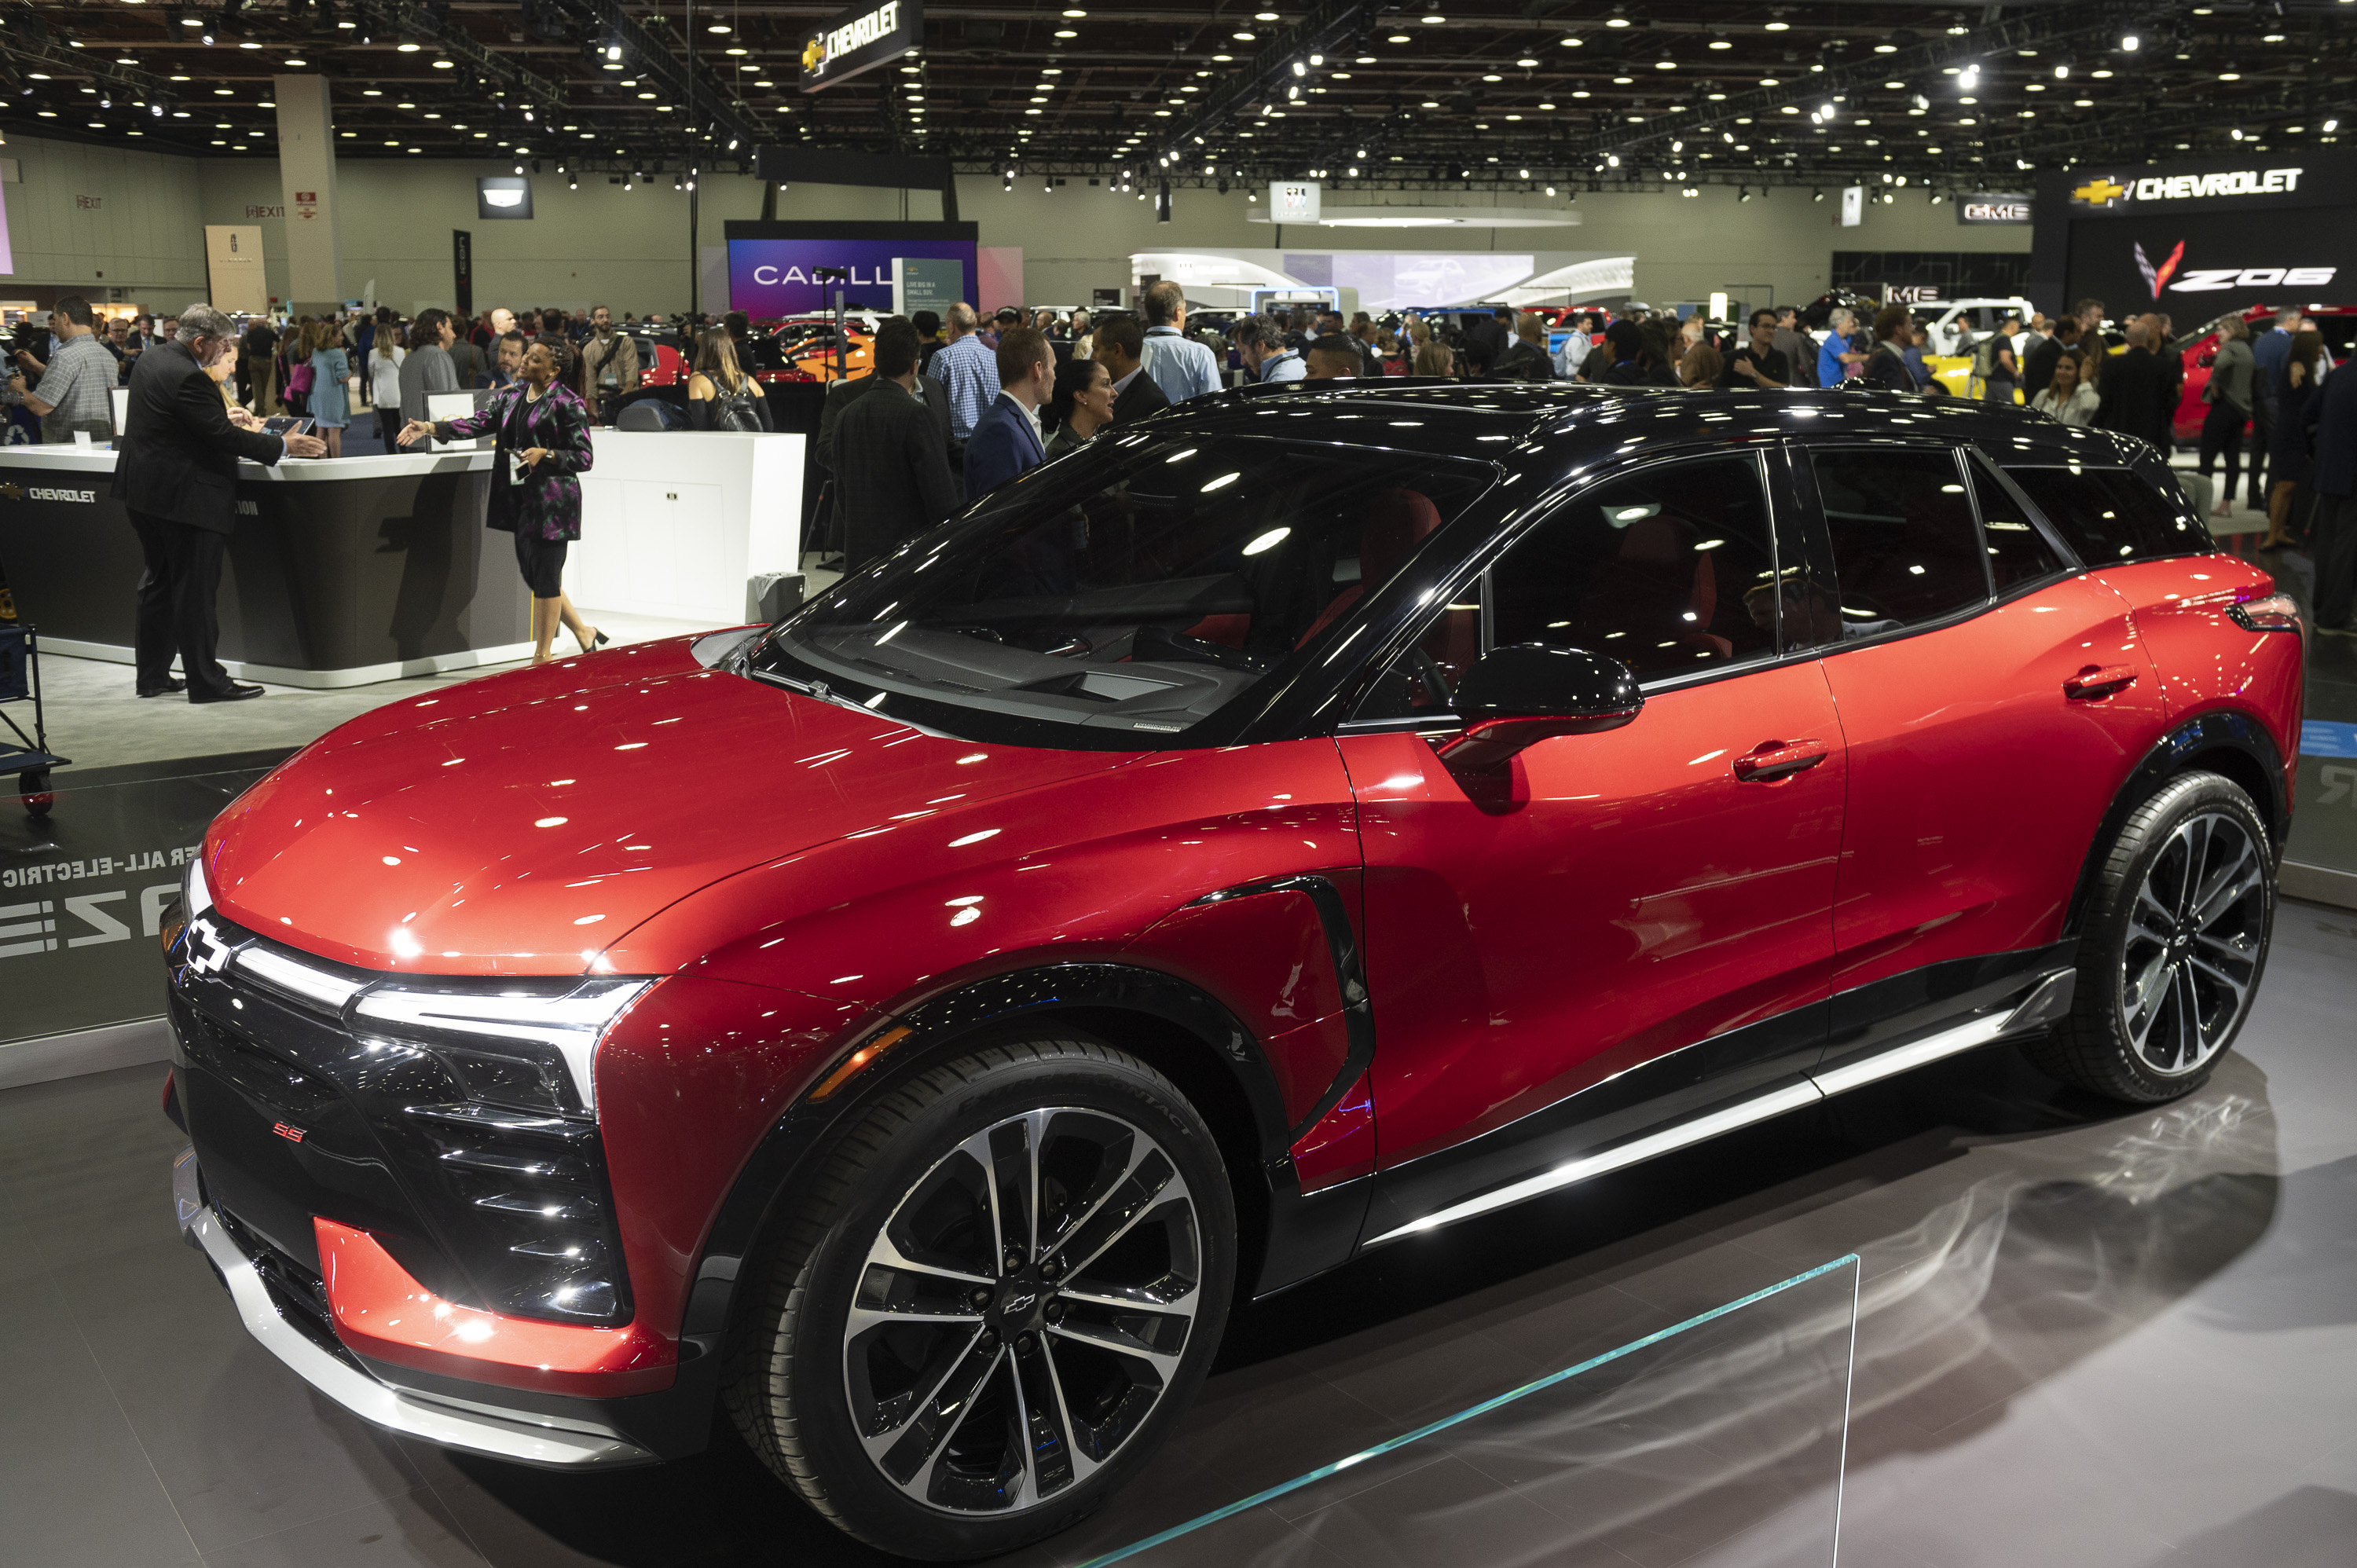 The Chevrolet Blazer EV on display as the 2022 North American International Auto Show begins with media preview day at Huntington Place in Detroit on Wednesday, Sept. 14 2022.